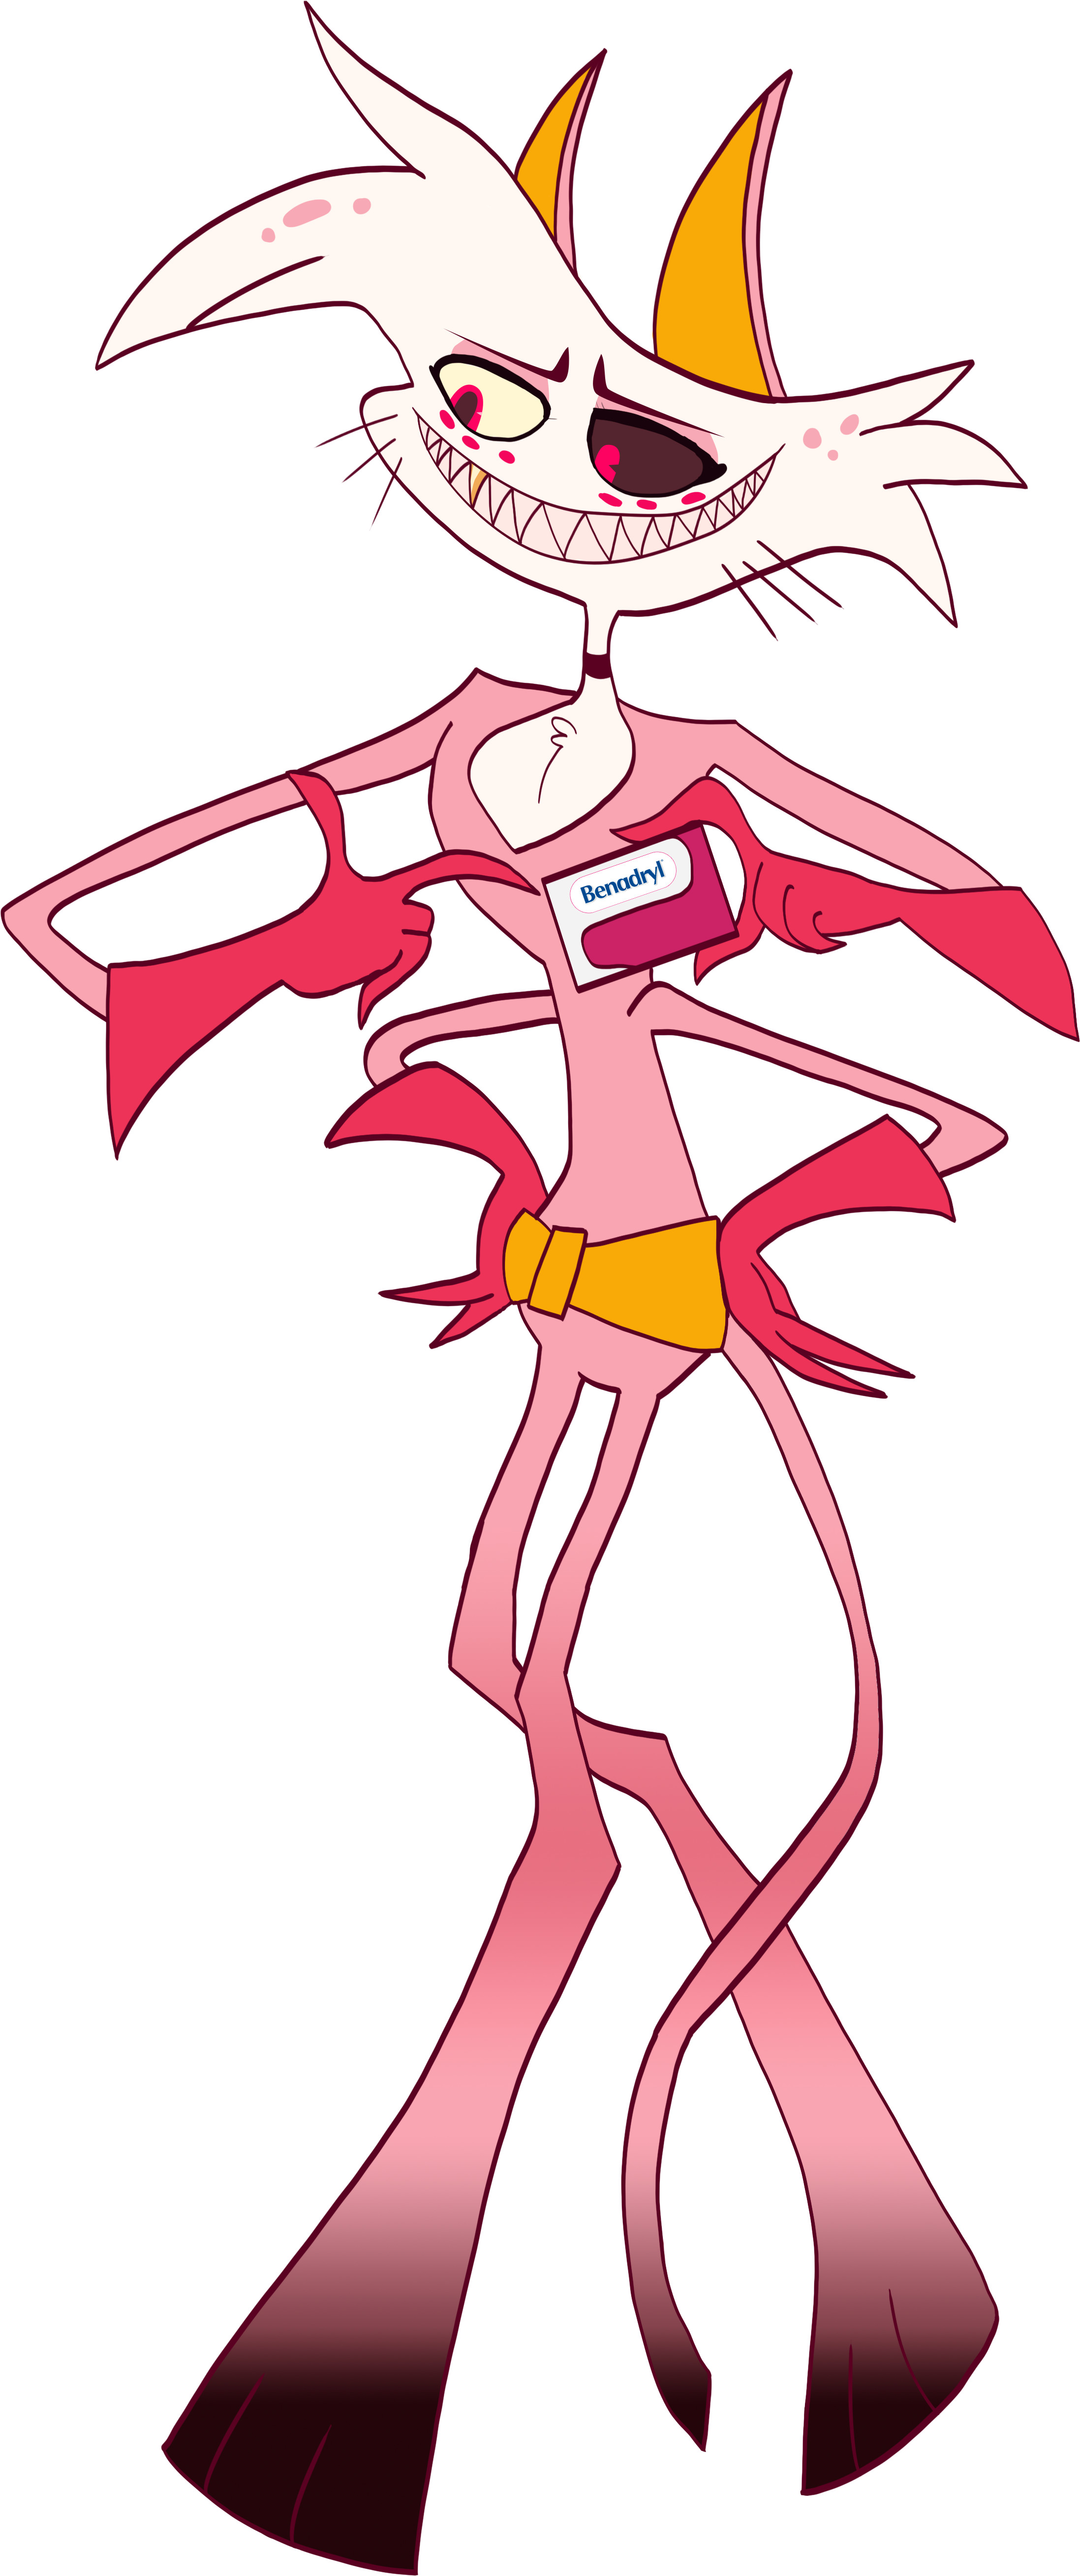 Angel Dust from Hazbin Hotel as the Cat. You don't want to know what he plans on doing that Benadryl